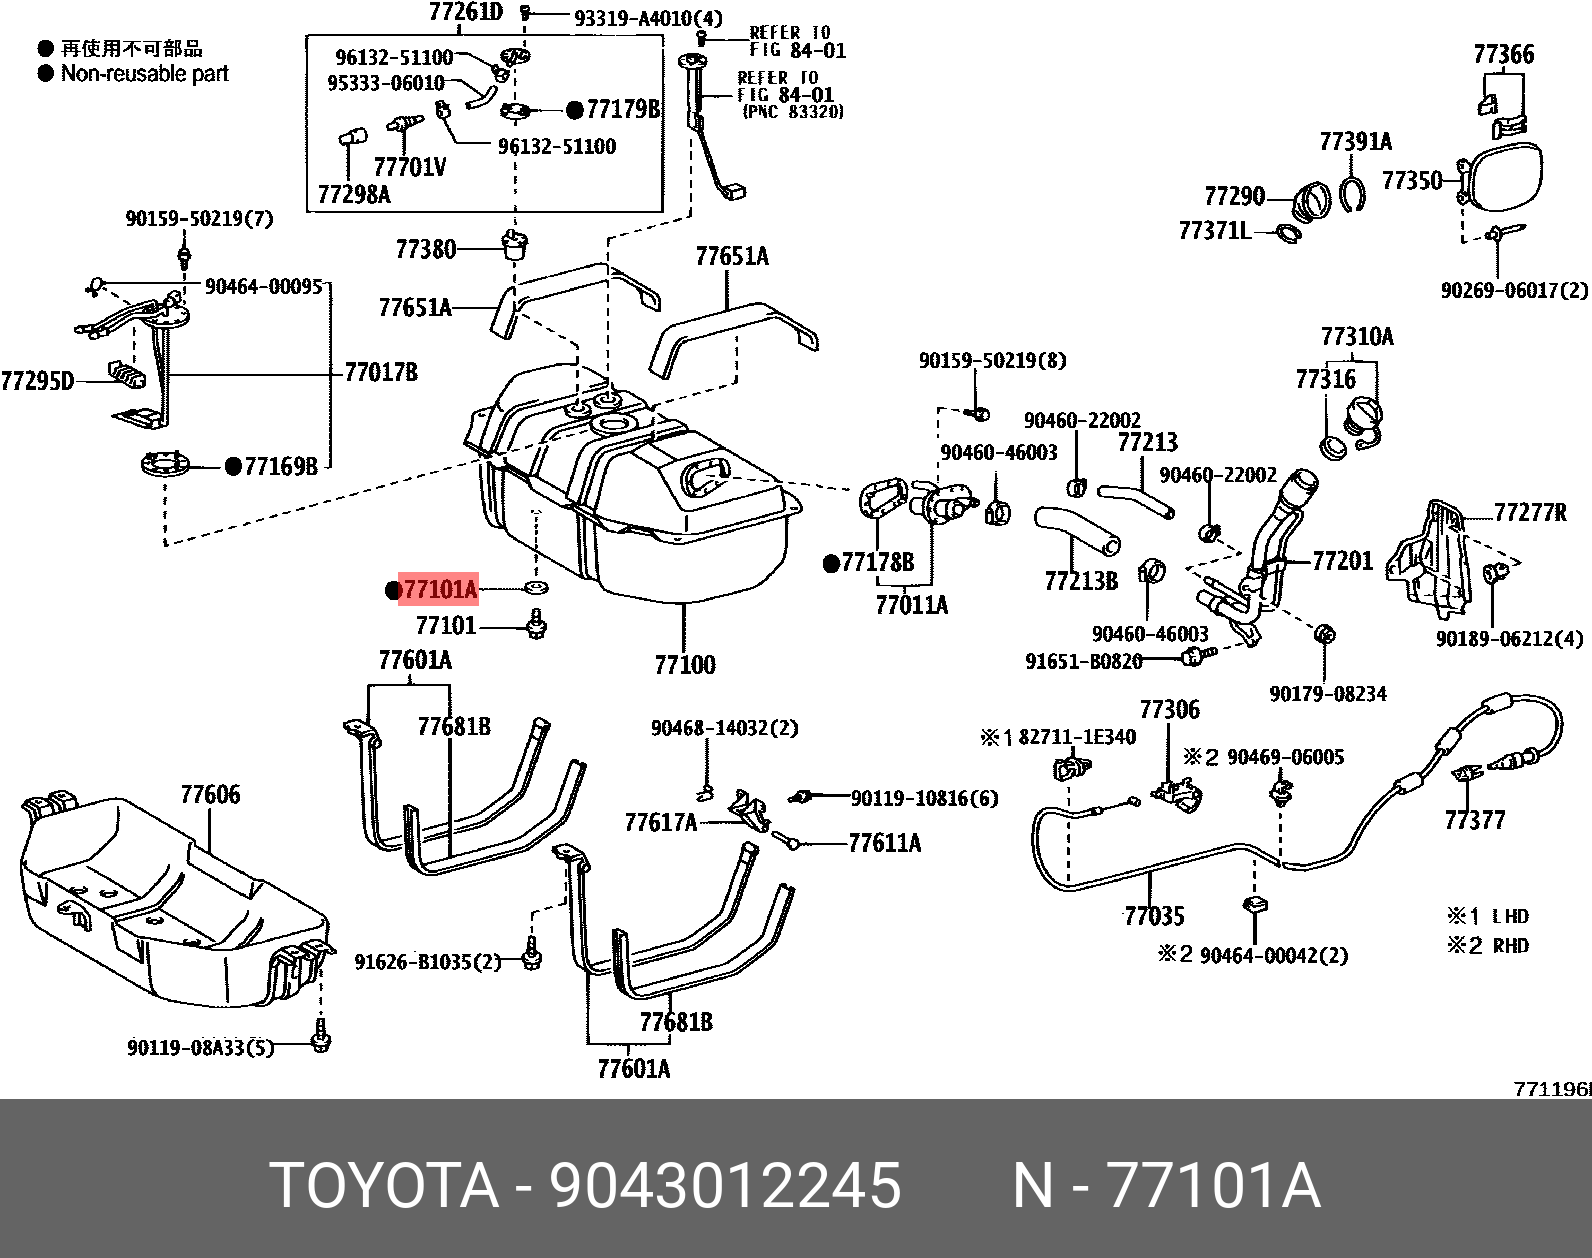 CAMRY 200109 - 200601, GASKET(FOR FUEL TANK)